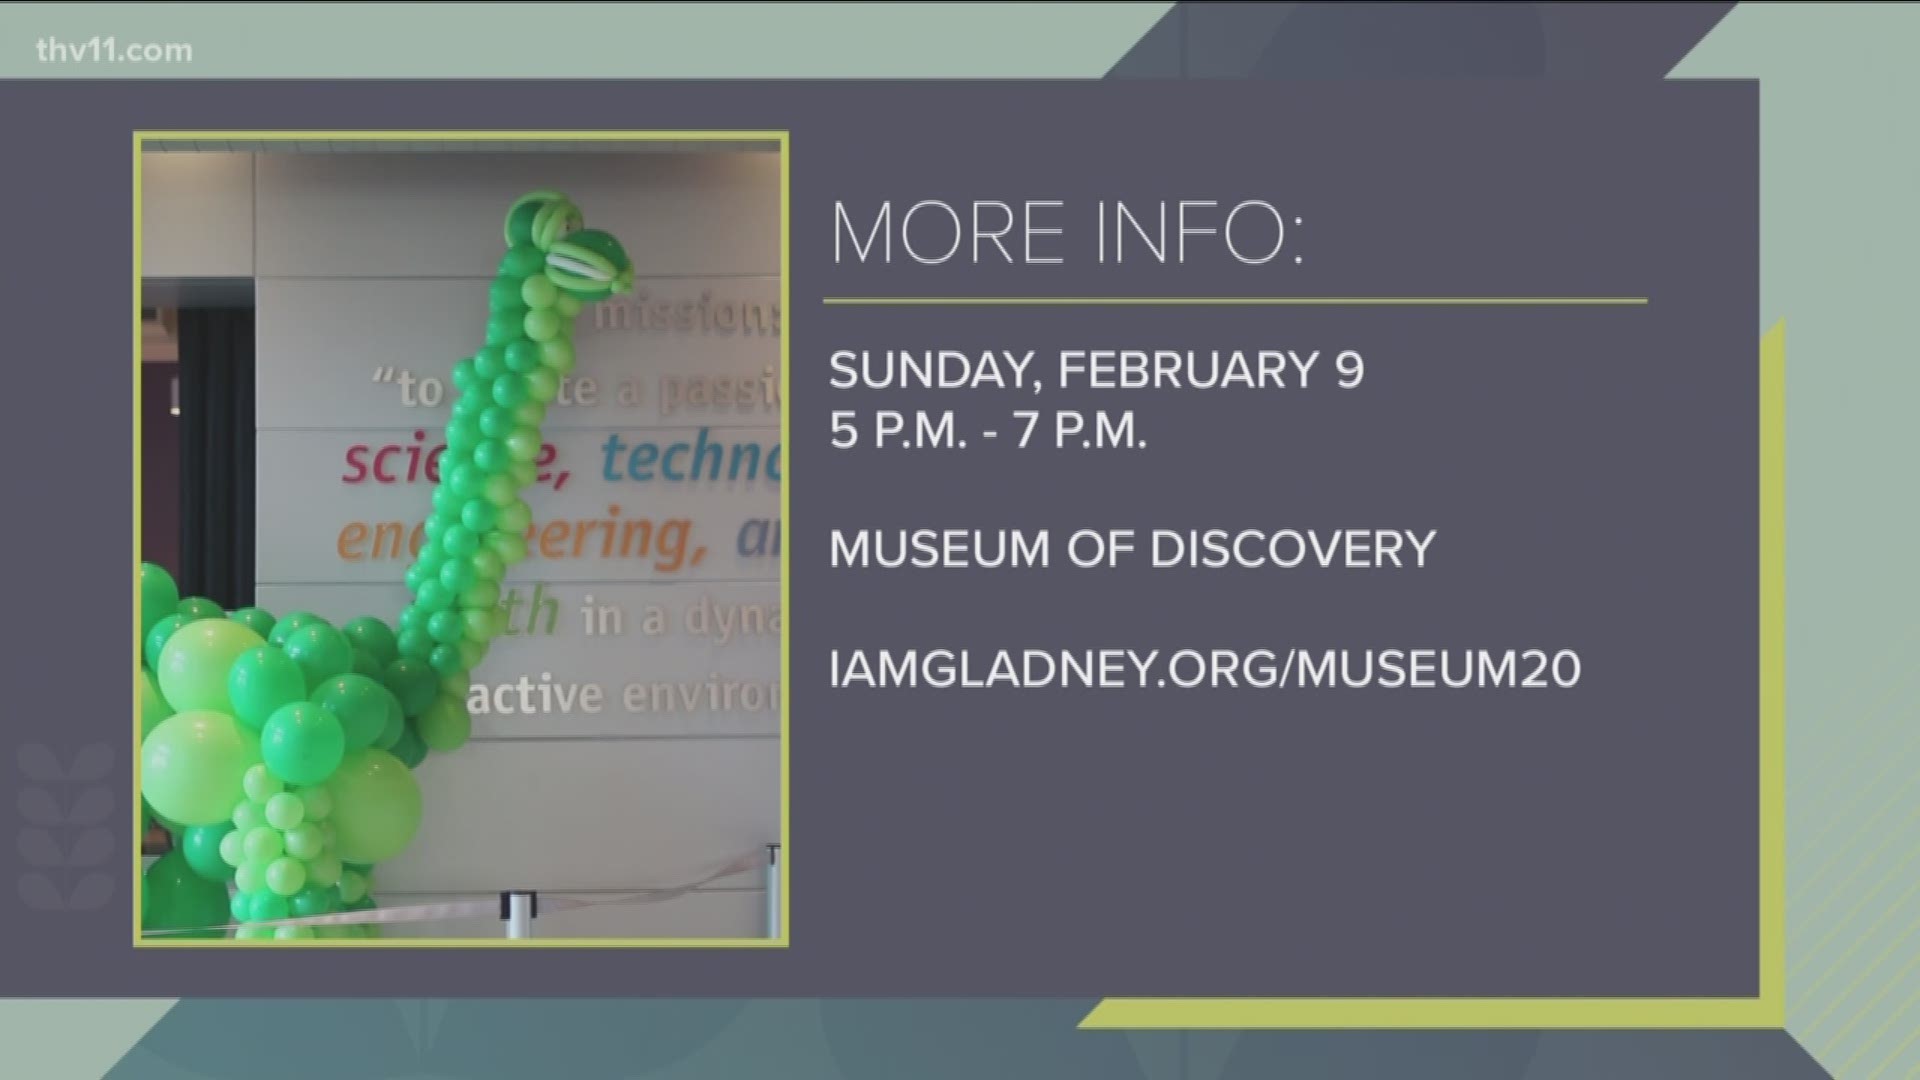 The Museum of Discovery is opening its doors for a special evening of food, science and more.